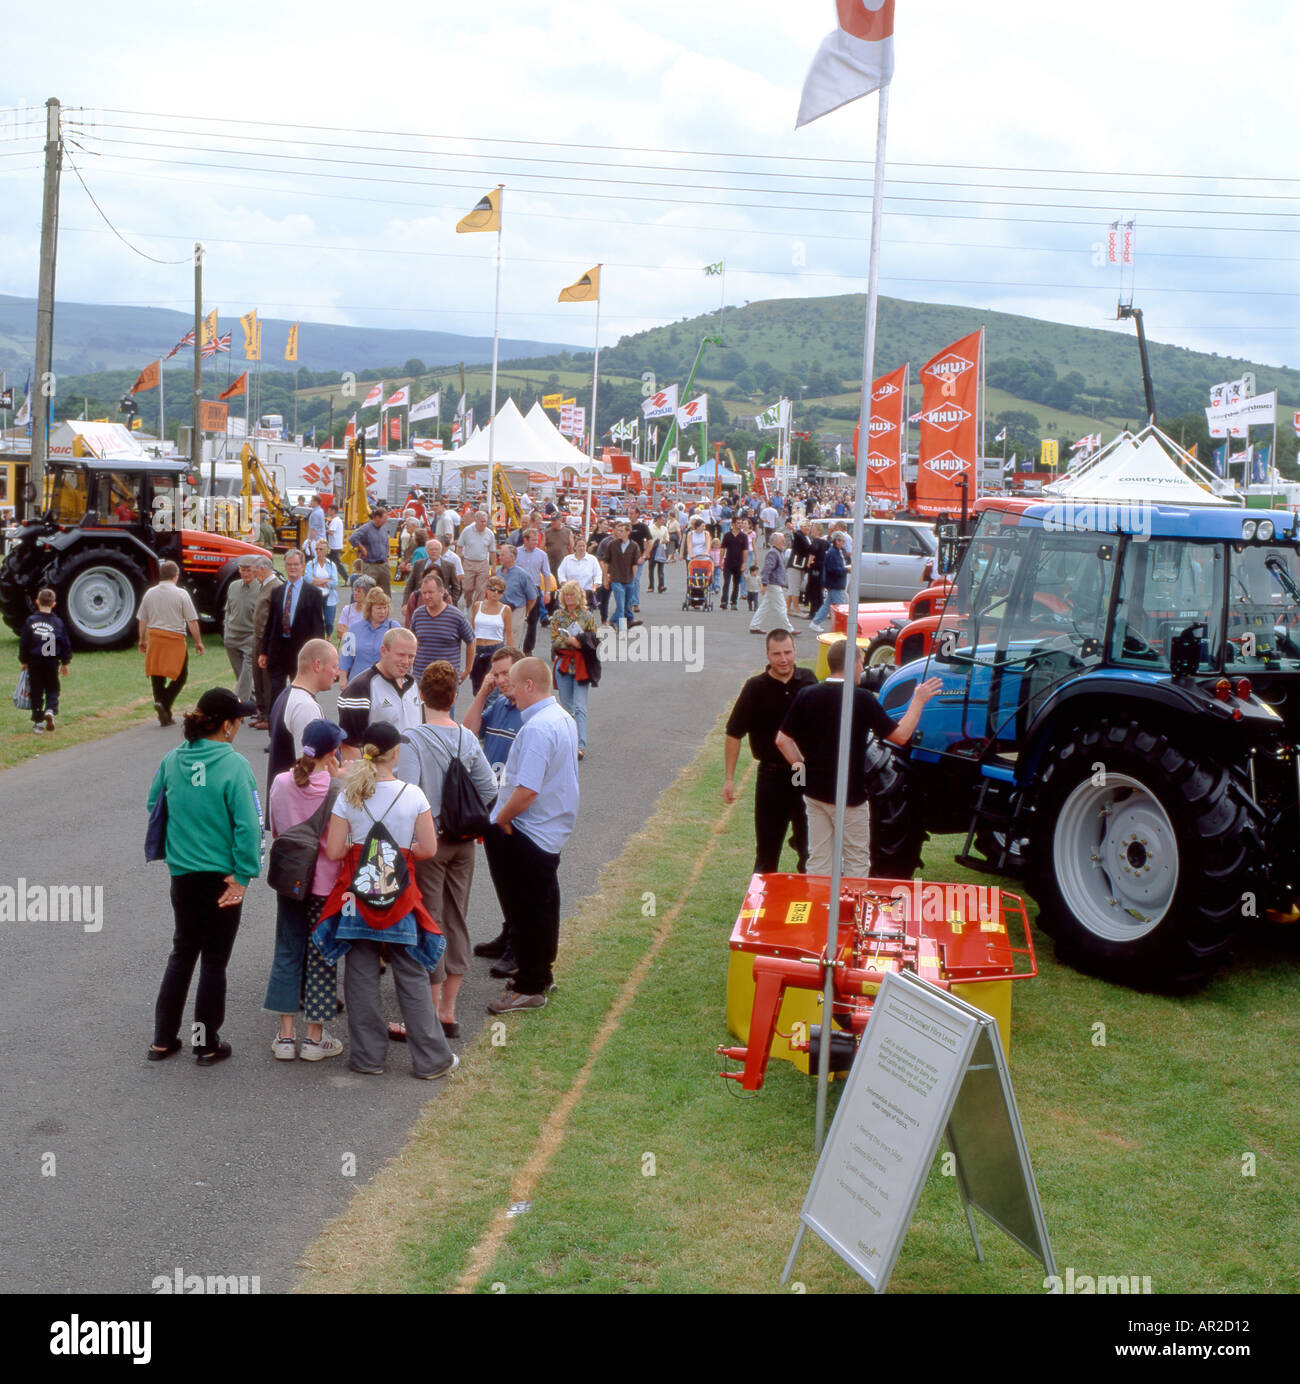 Royal Welsh Showground Builth Wells Powys Wales UK Stock Photo